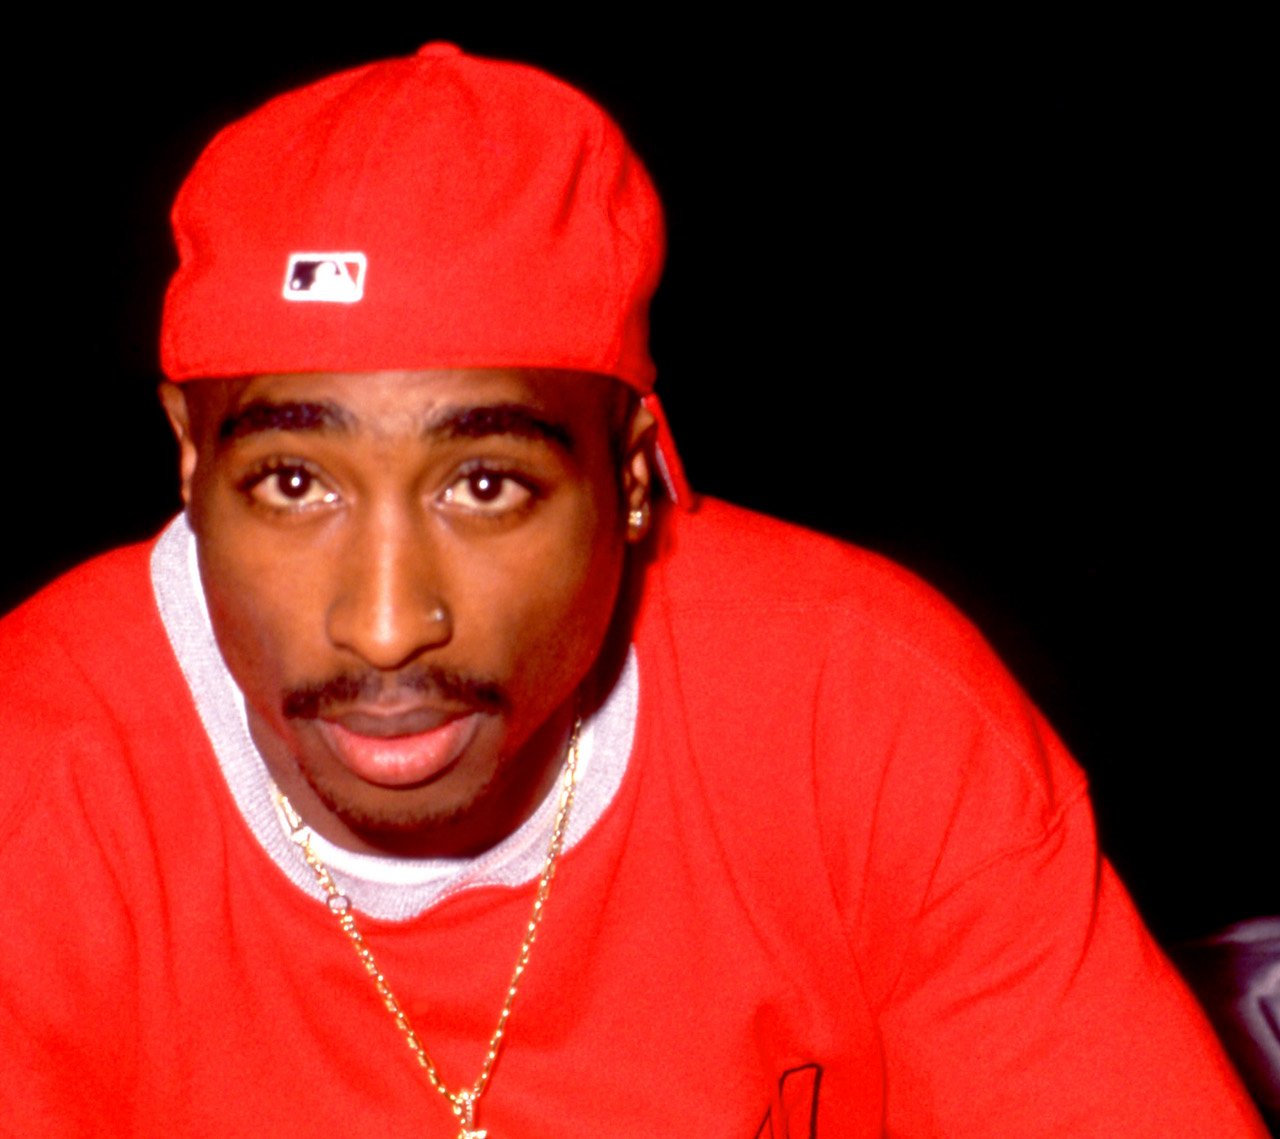 Tupac Shakur dazes into the camera wearing red and a gold chain